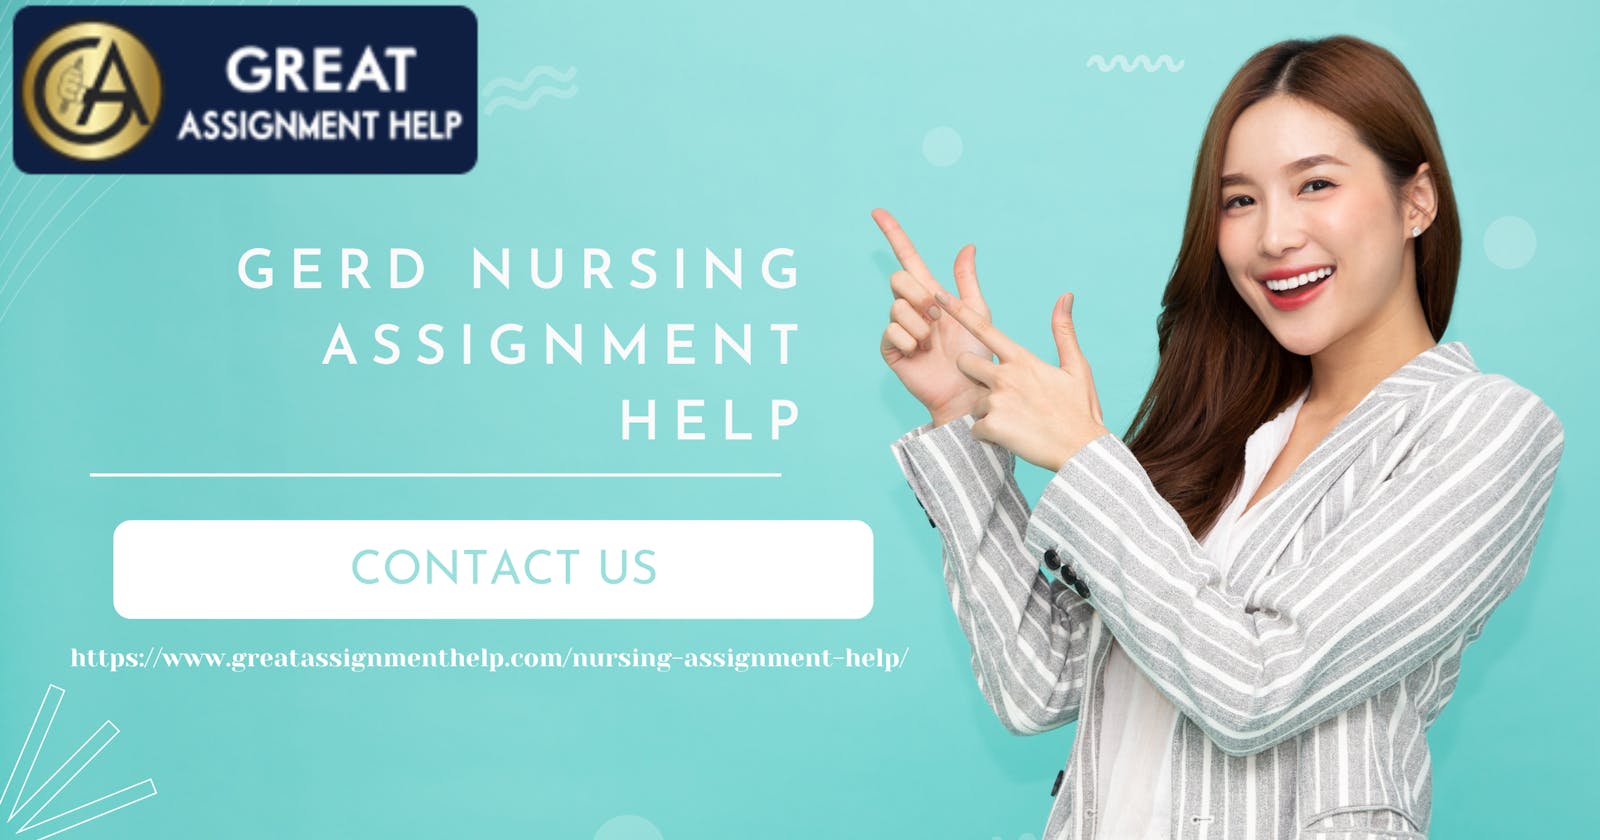 Get the Best Online GERD Nursing Assignment Help in the USA by expert writers with 100% satisfaction